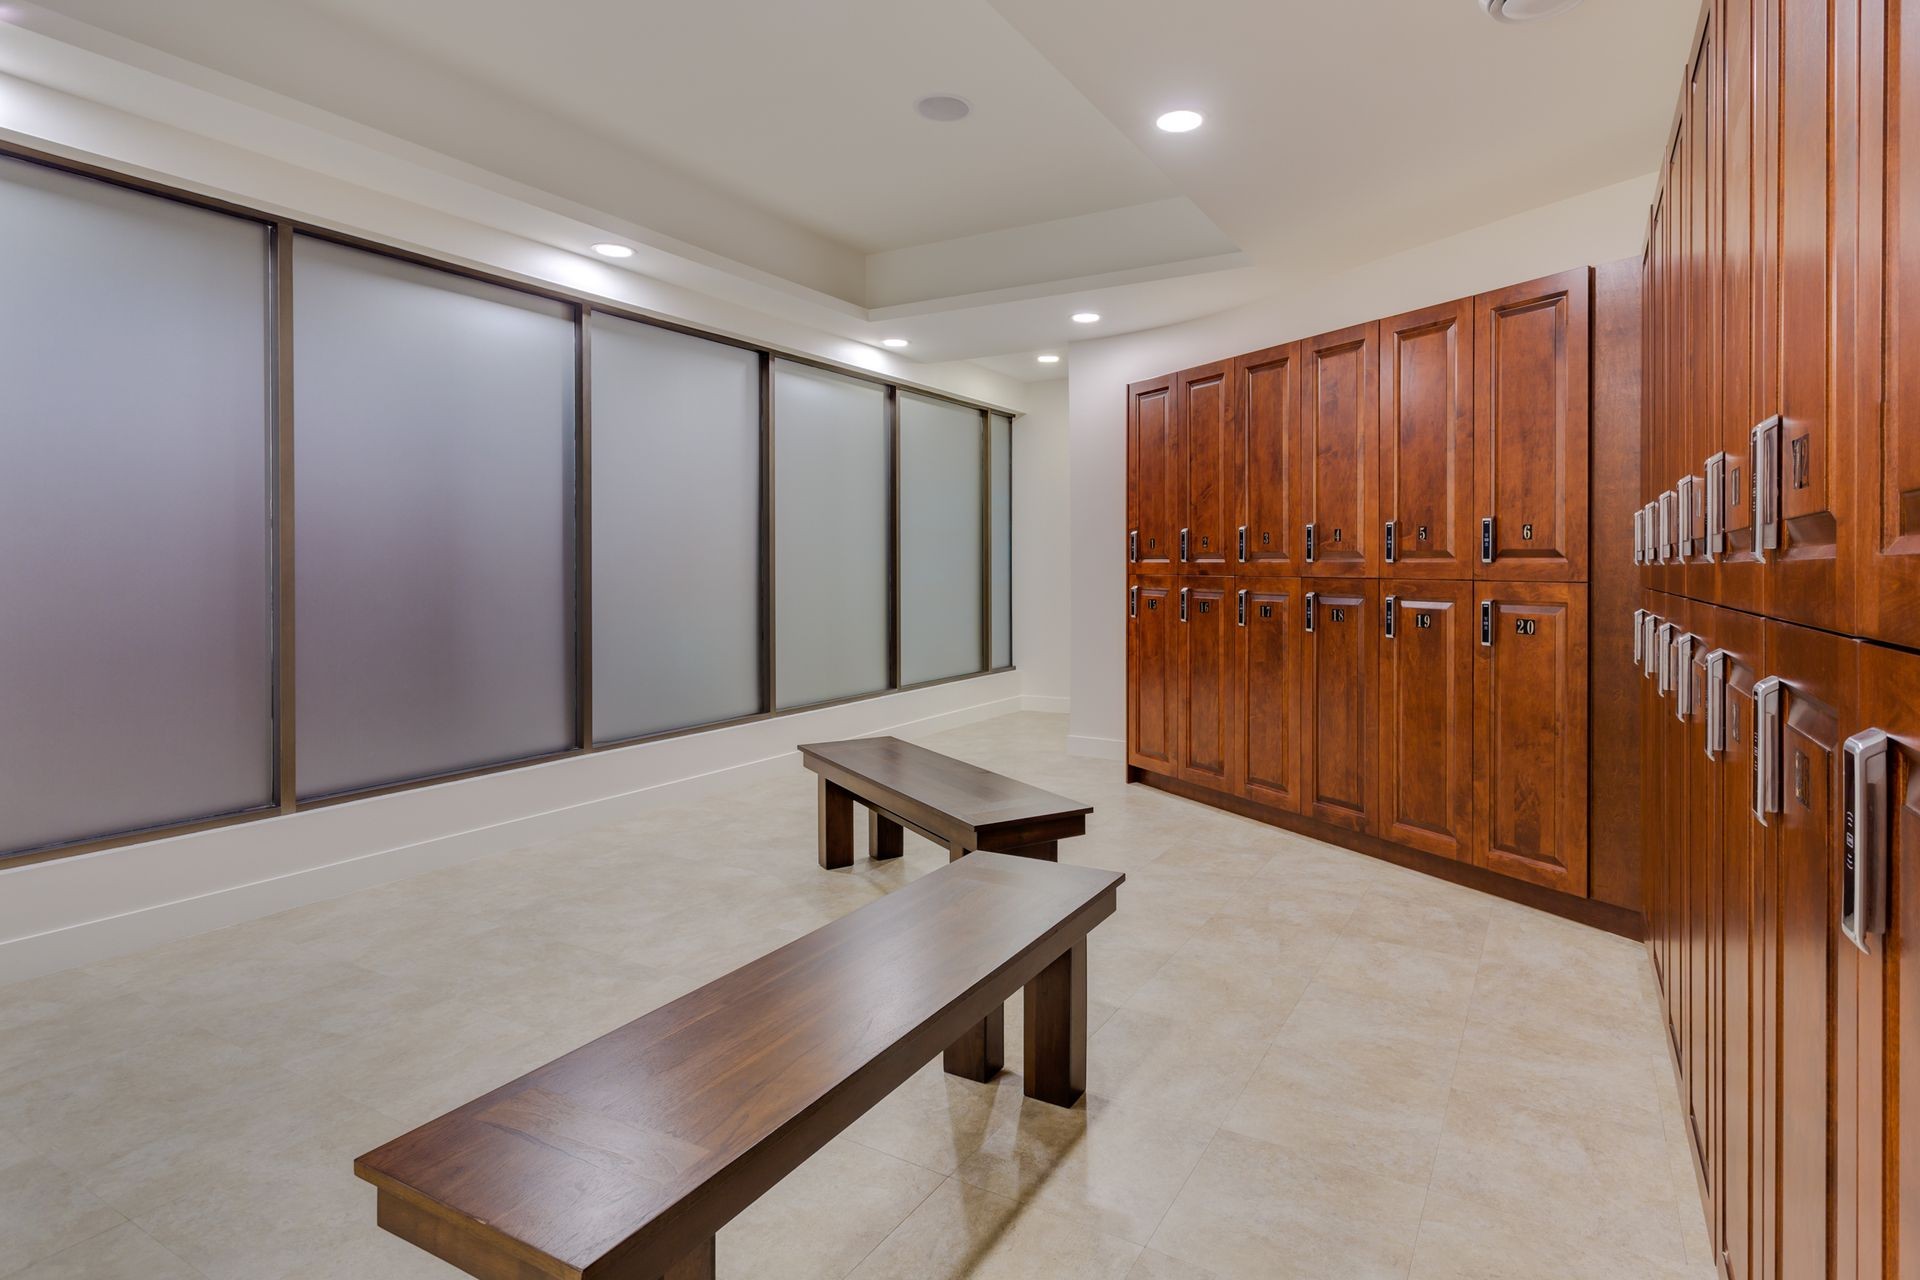 Newly built modern dressing room with lockers and benches for sitting.